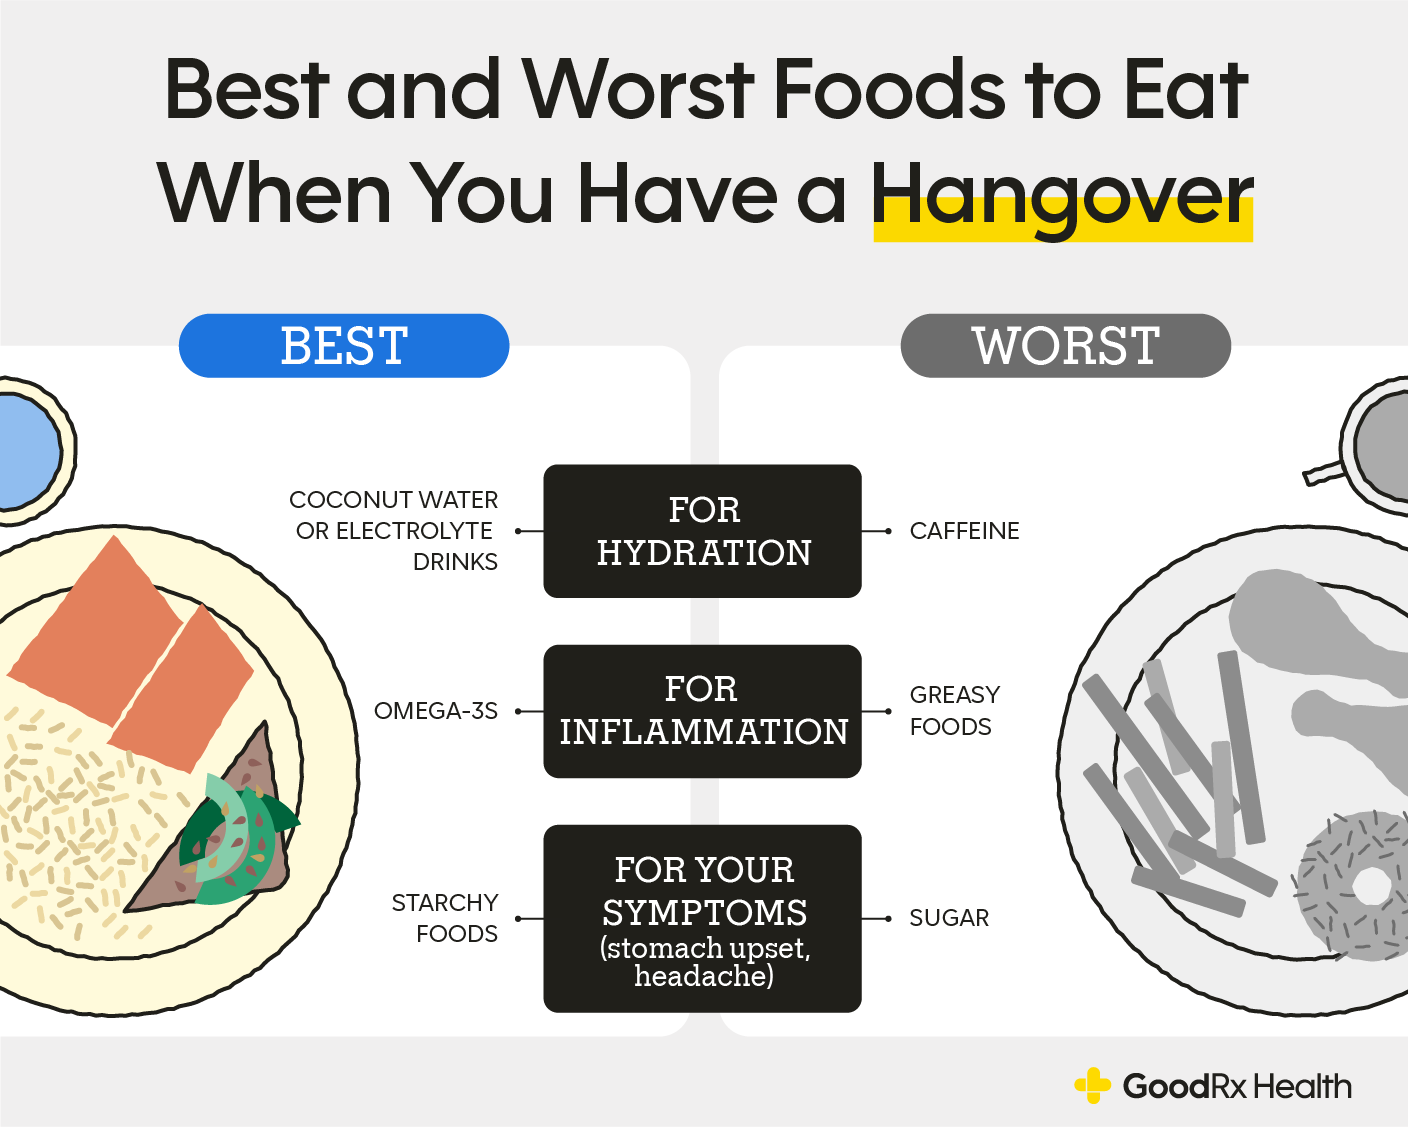 What foods help hangover?